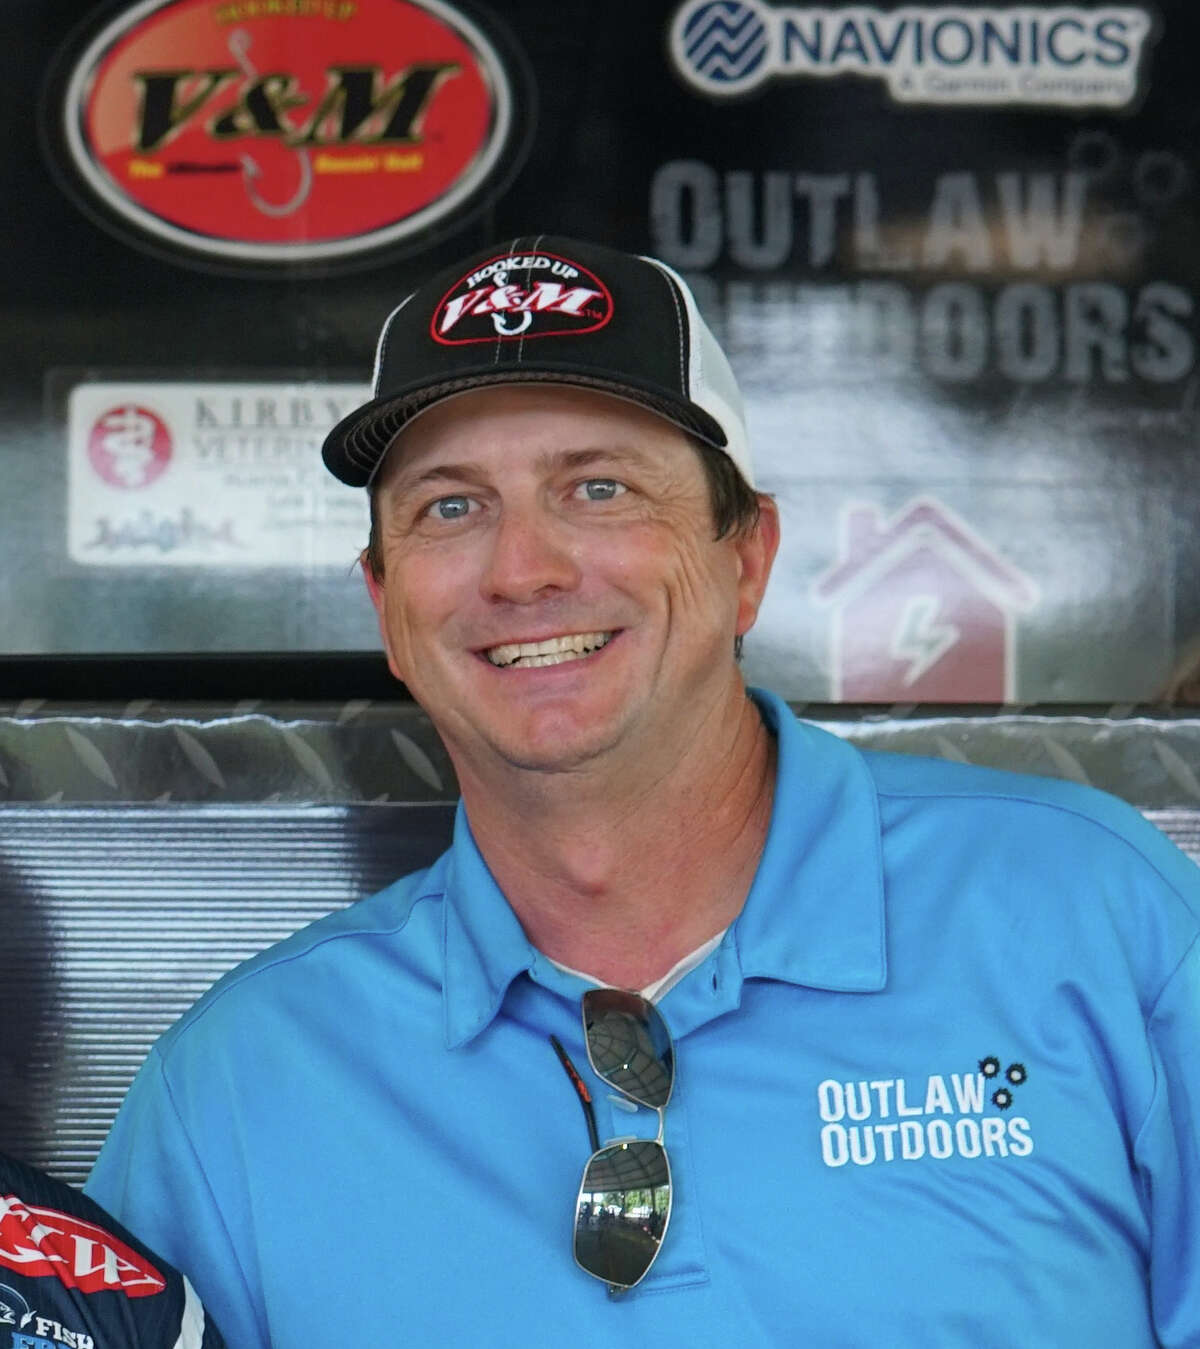 Clint Wade is the co-founder and tournament director of Outlaw Outdoors.